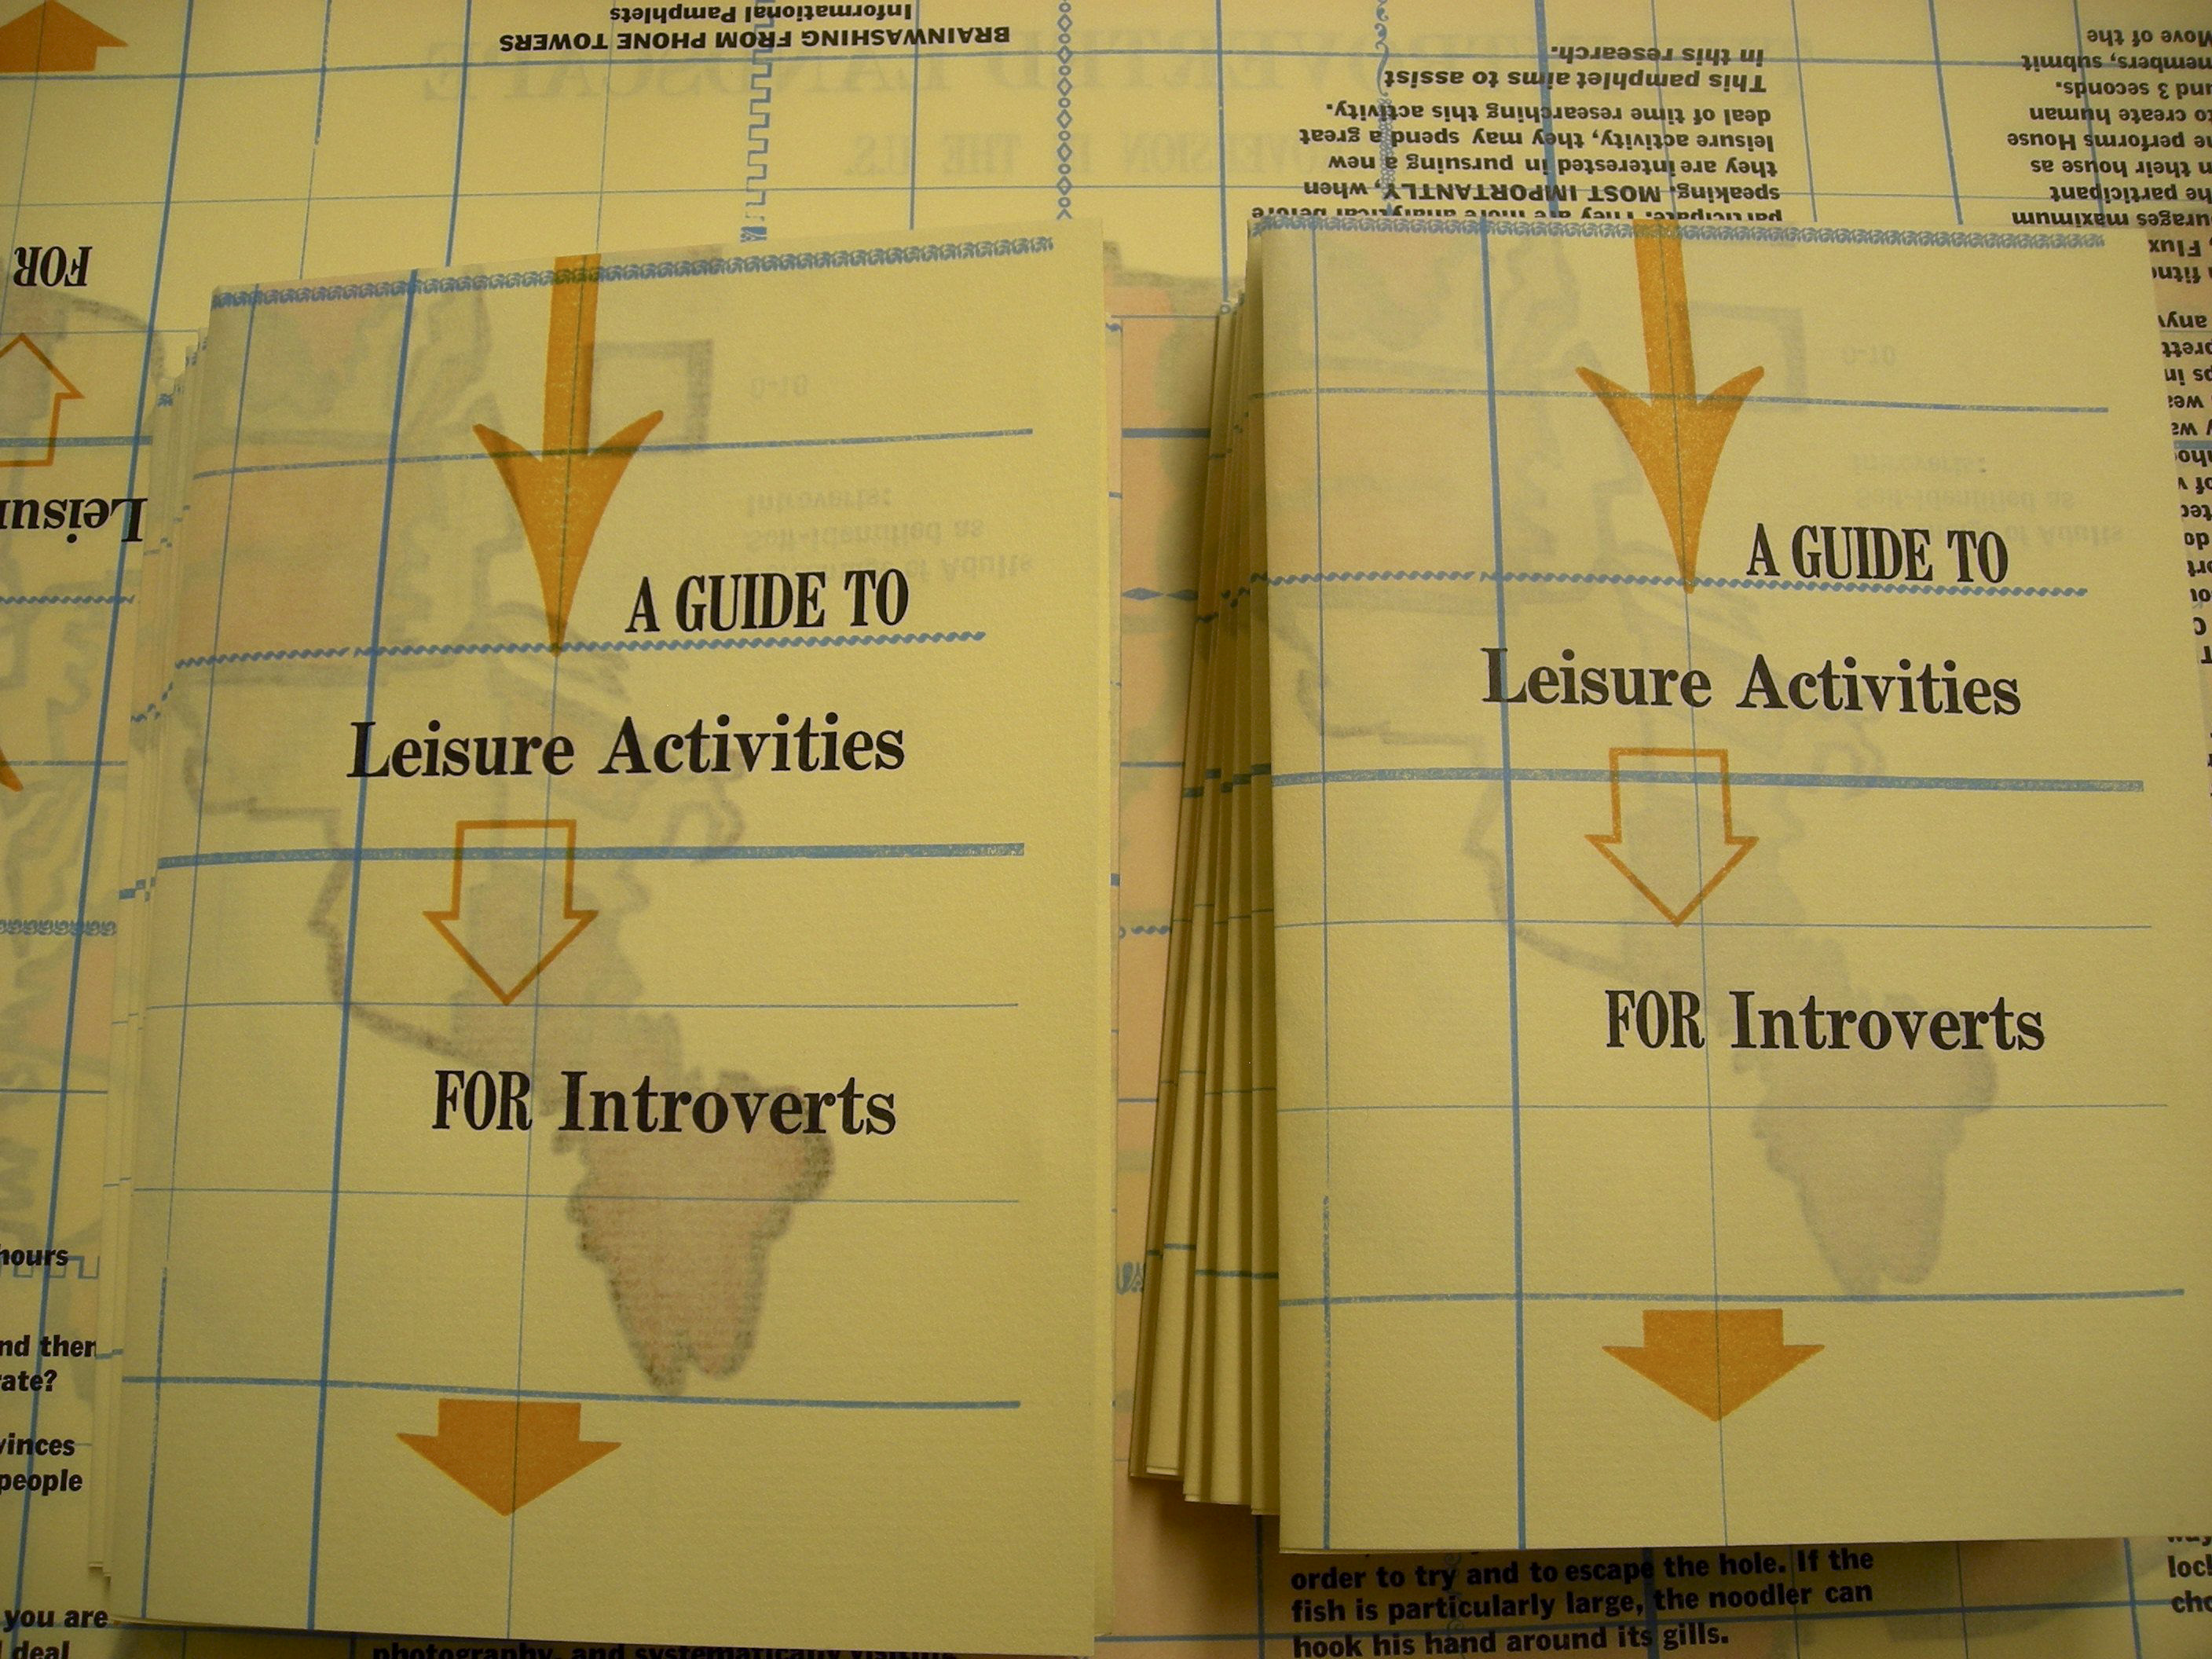 A Guide to Leisure Activities for Introverts